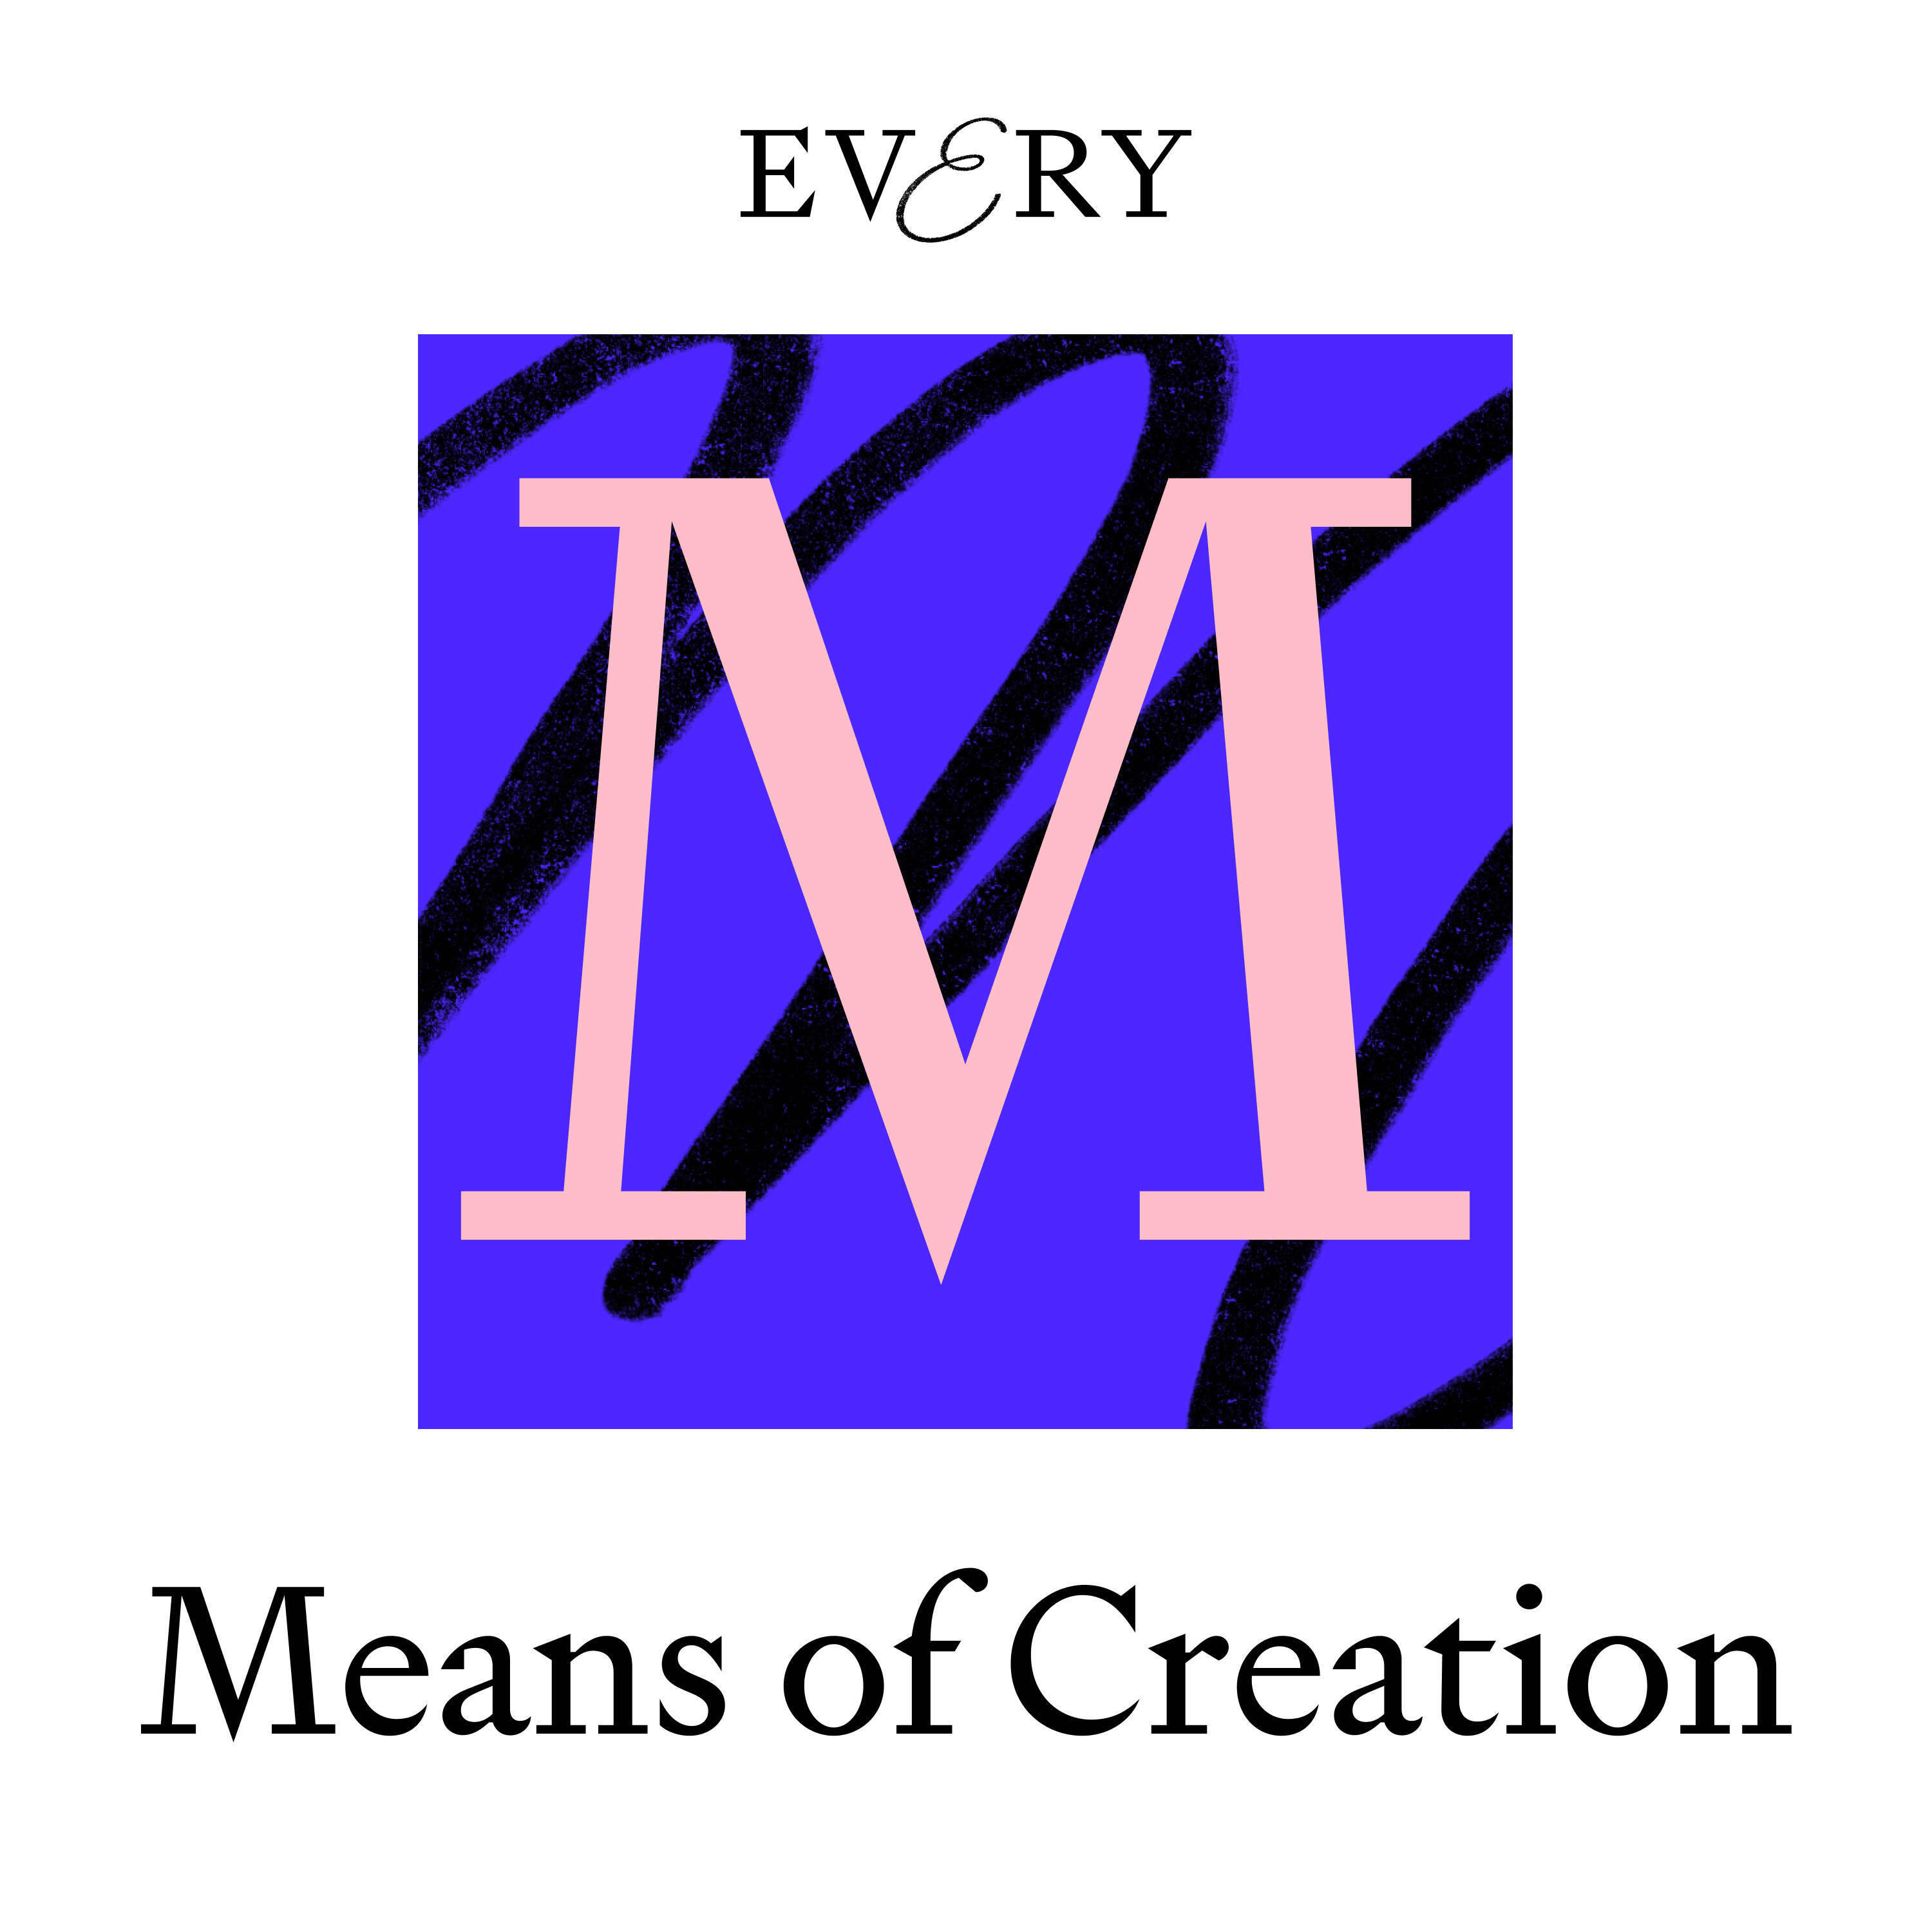 Means of Creation